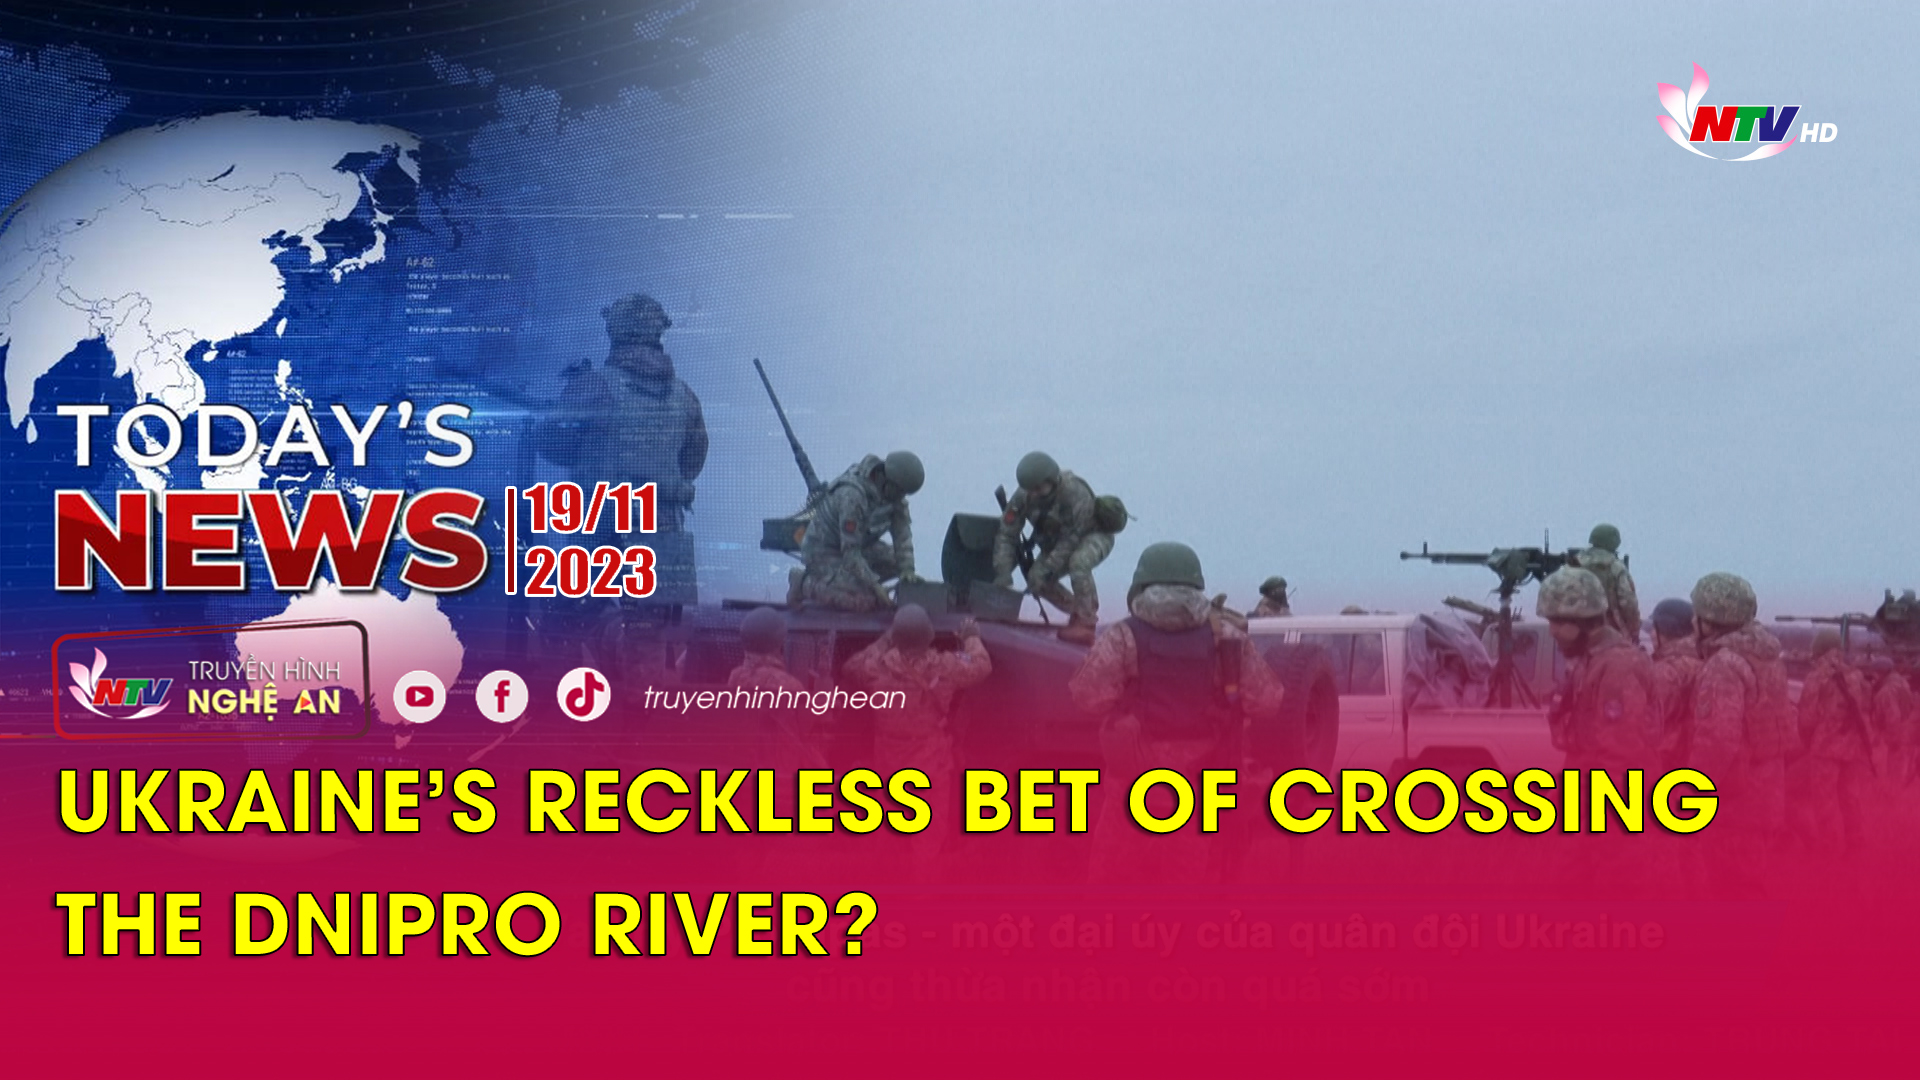 Today's News - 19/11/2023: Ukraine's reckless bet of crossing the Dnipro River?